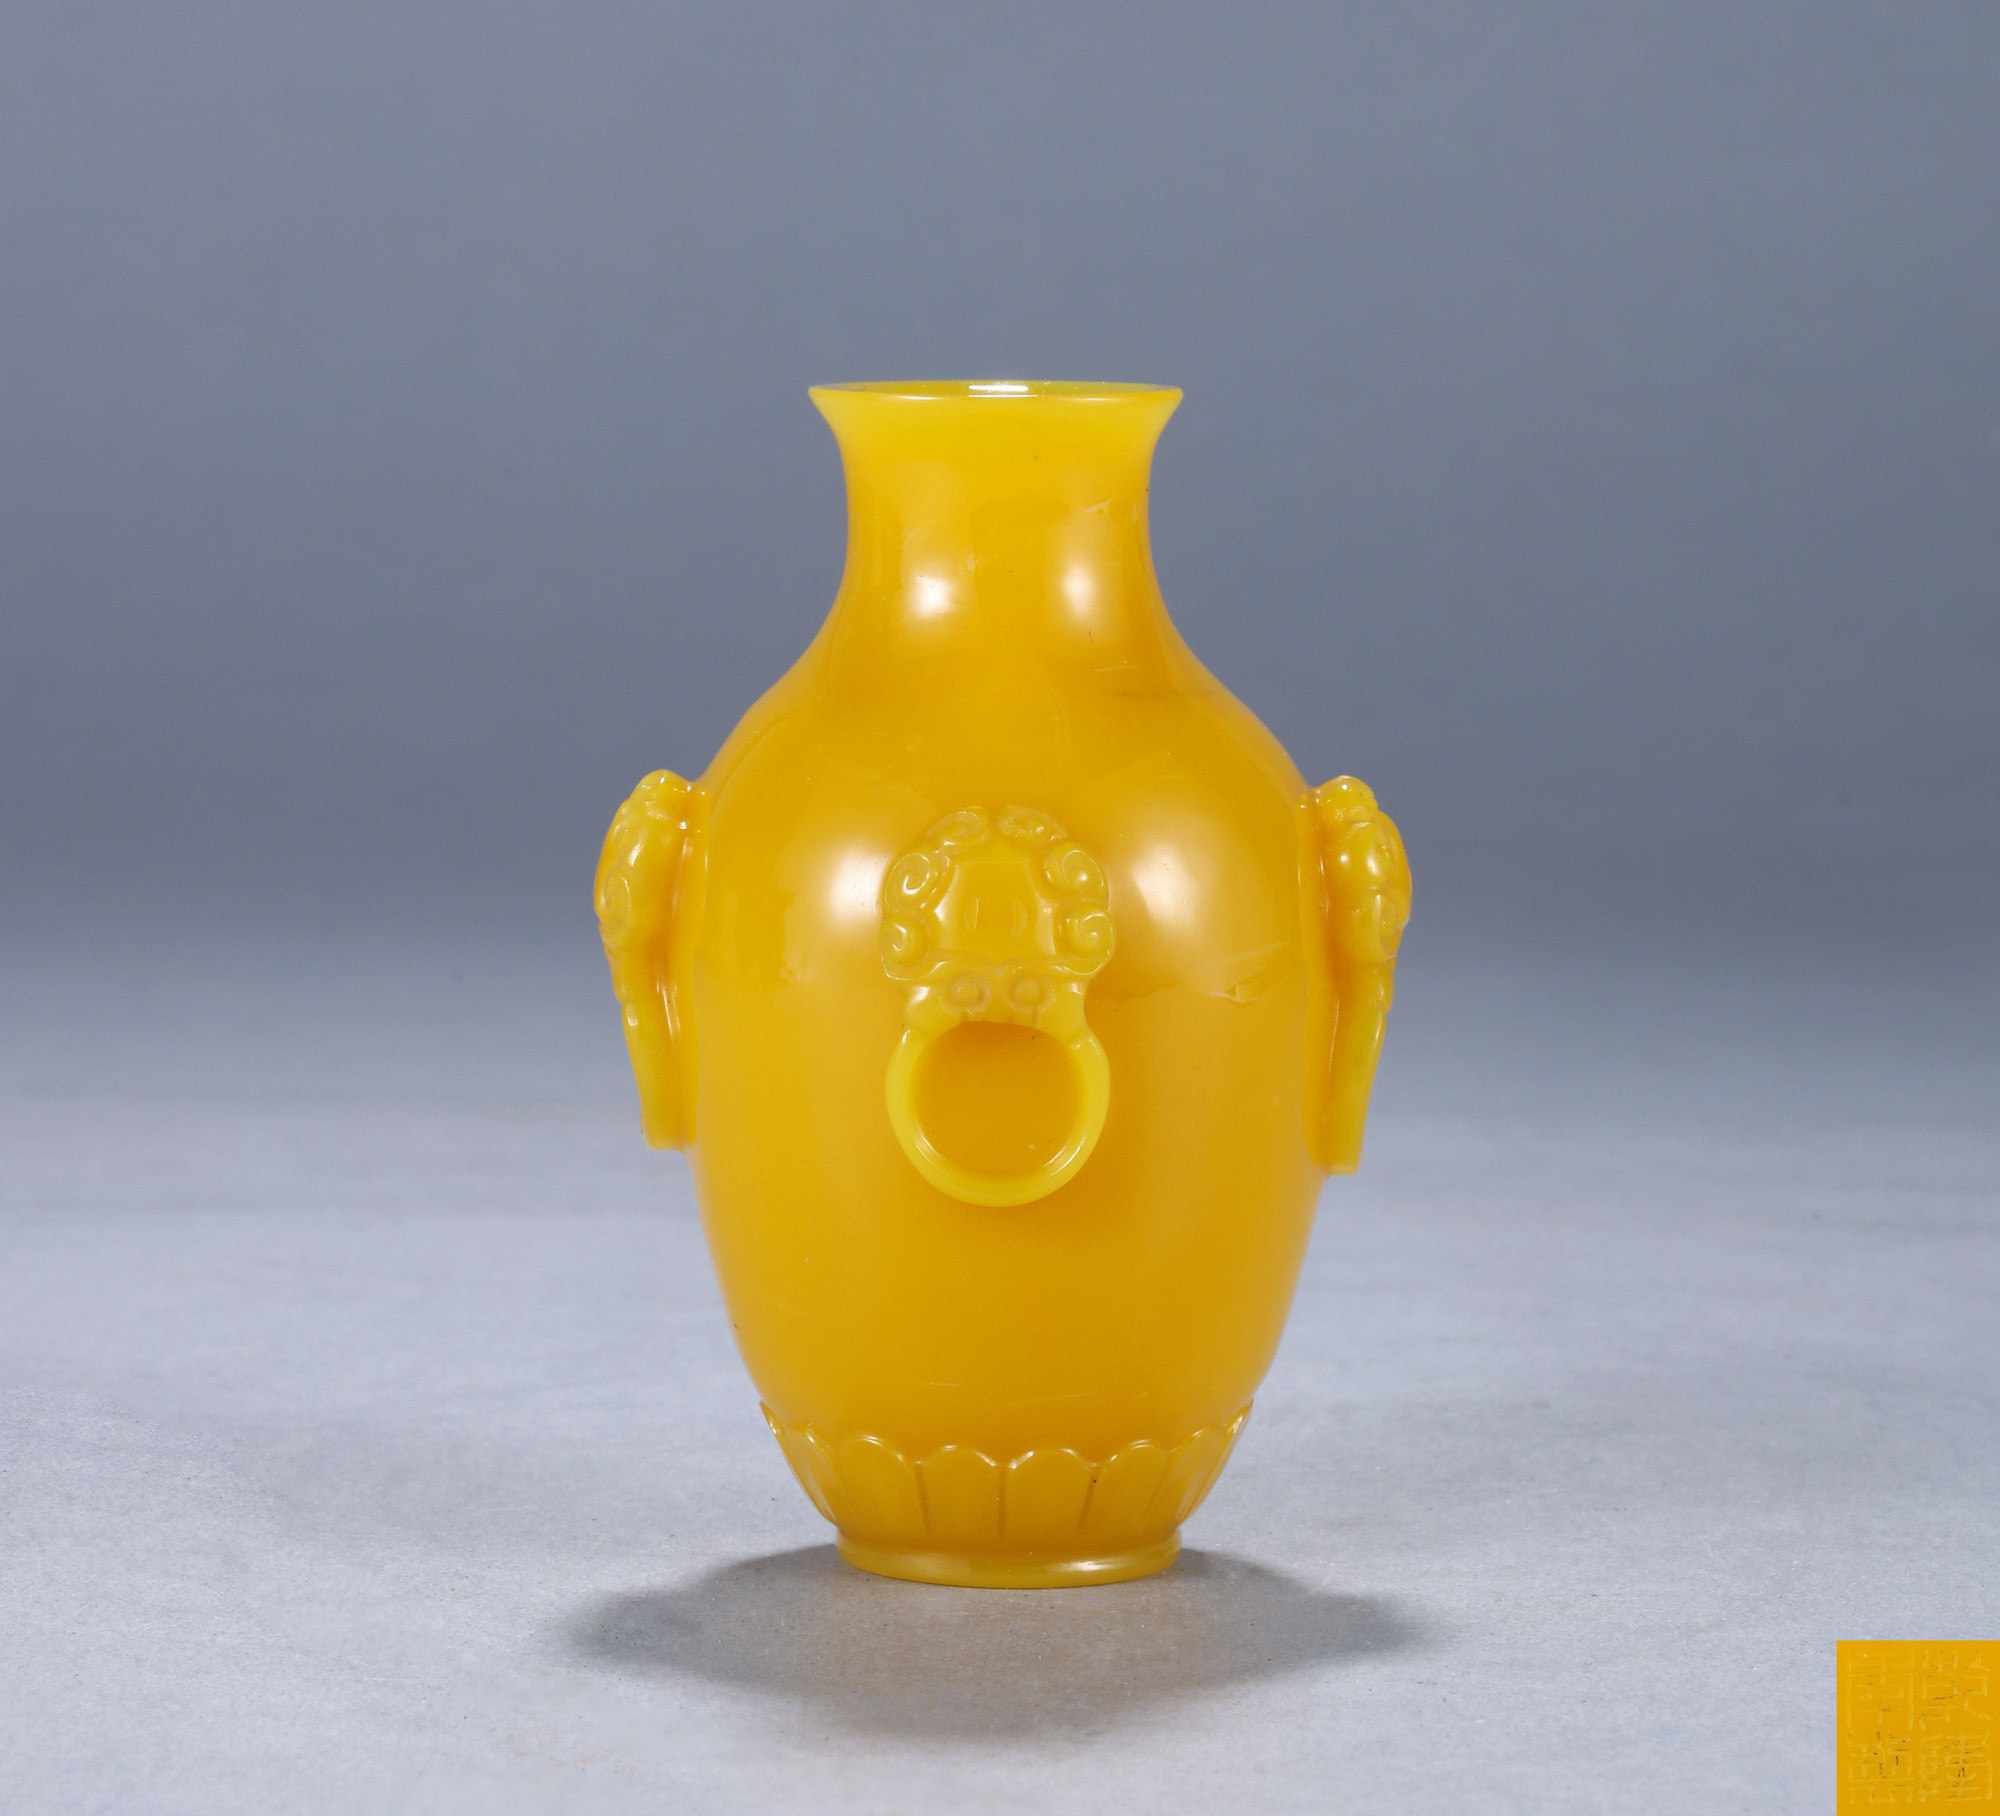 A YELLOW GLASS VASE